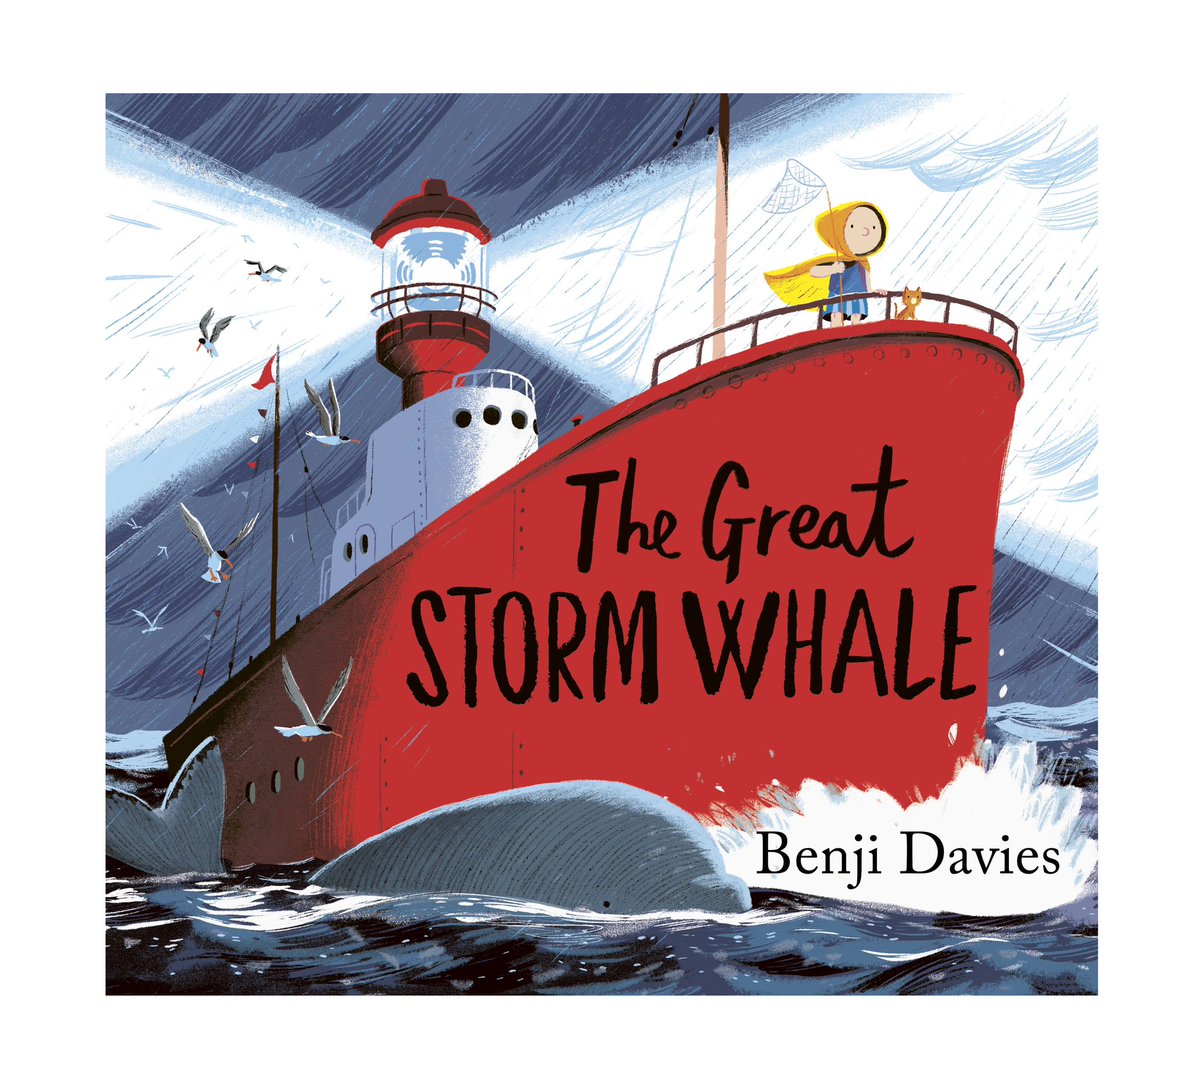 Wishing the happiest of publication days to the incomparable @Benji_Davies - The Great Storm Whale is out today! We are so incredibly proud to publish it @simonkids_UK.